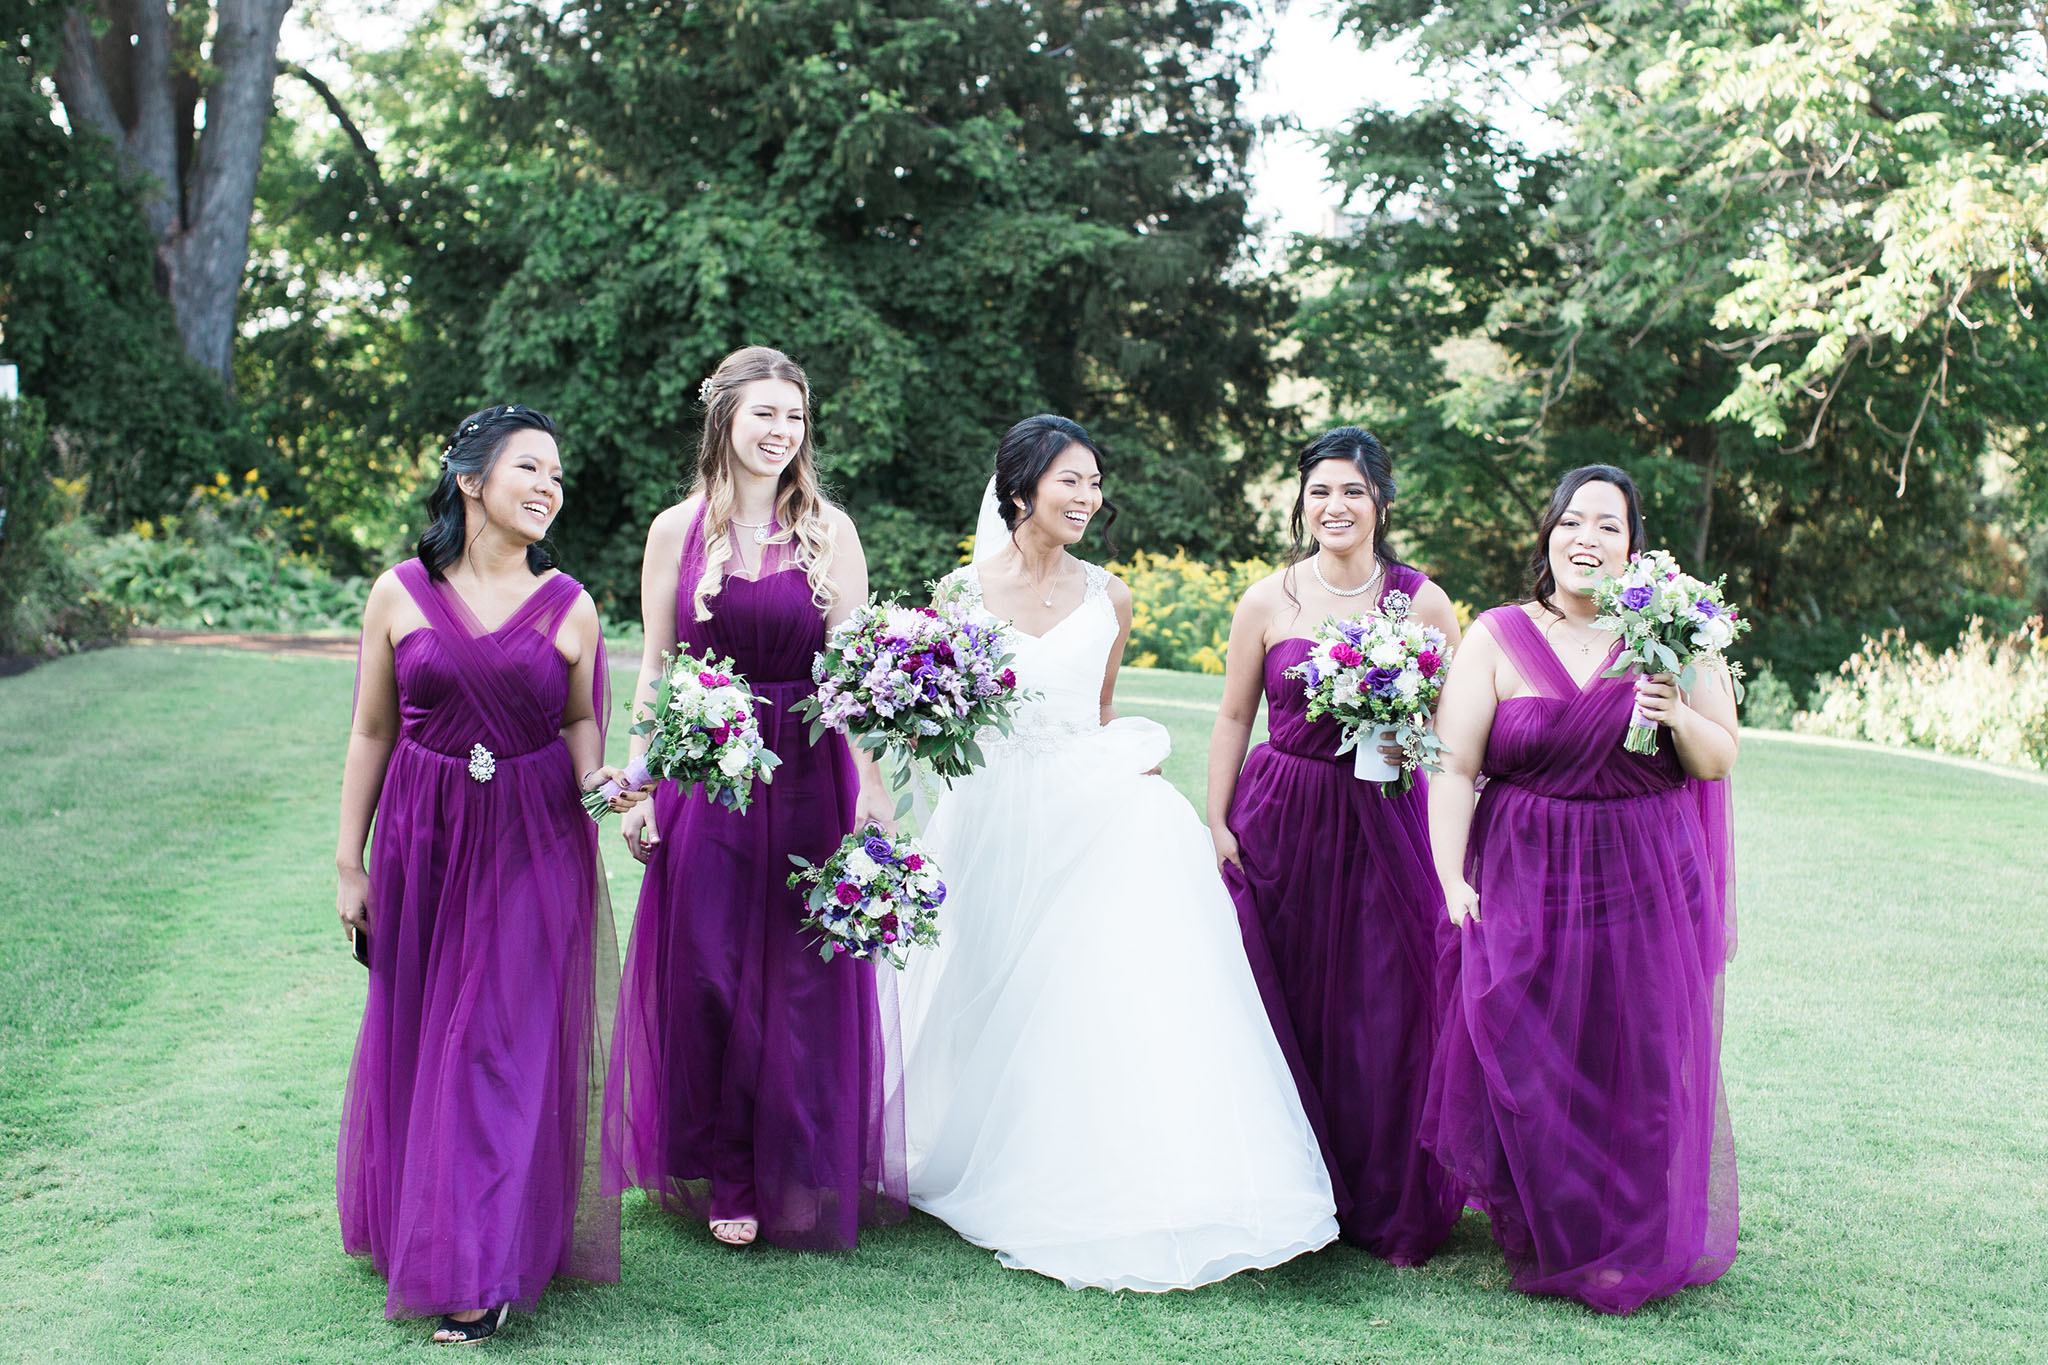 The deep purple dresses on the bridesmaids is eye grabbing in this photo.